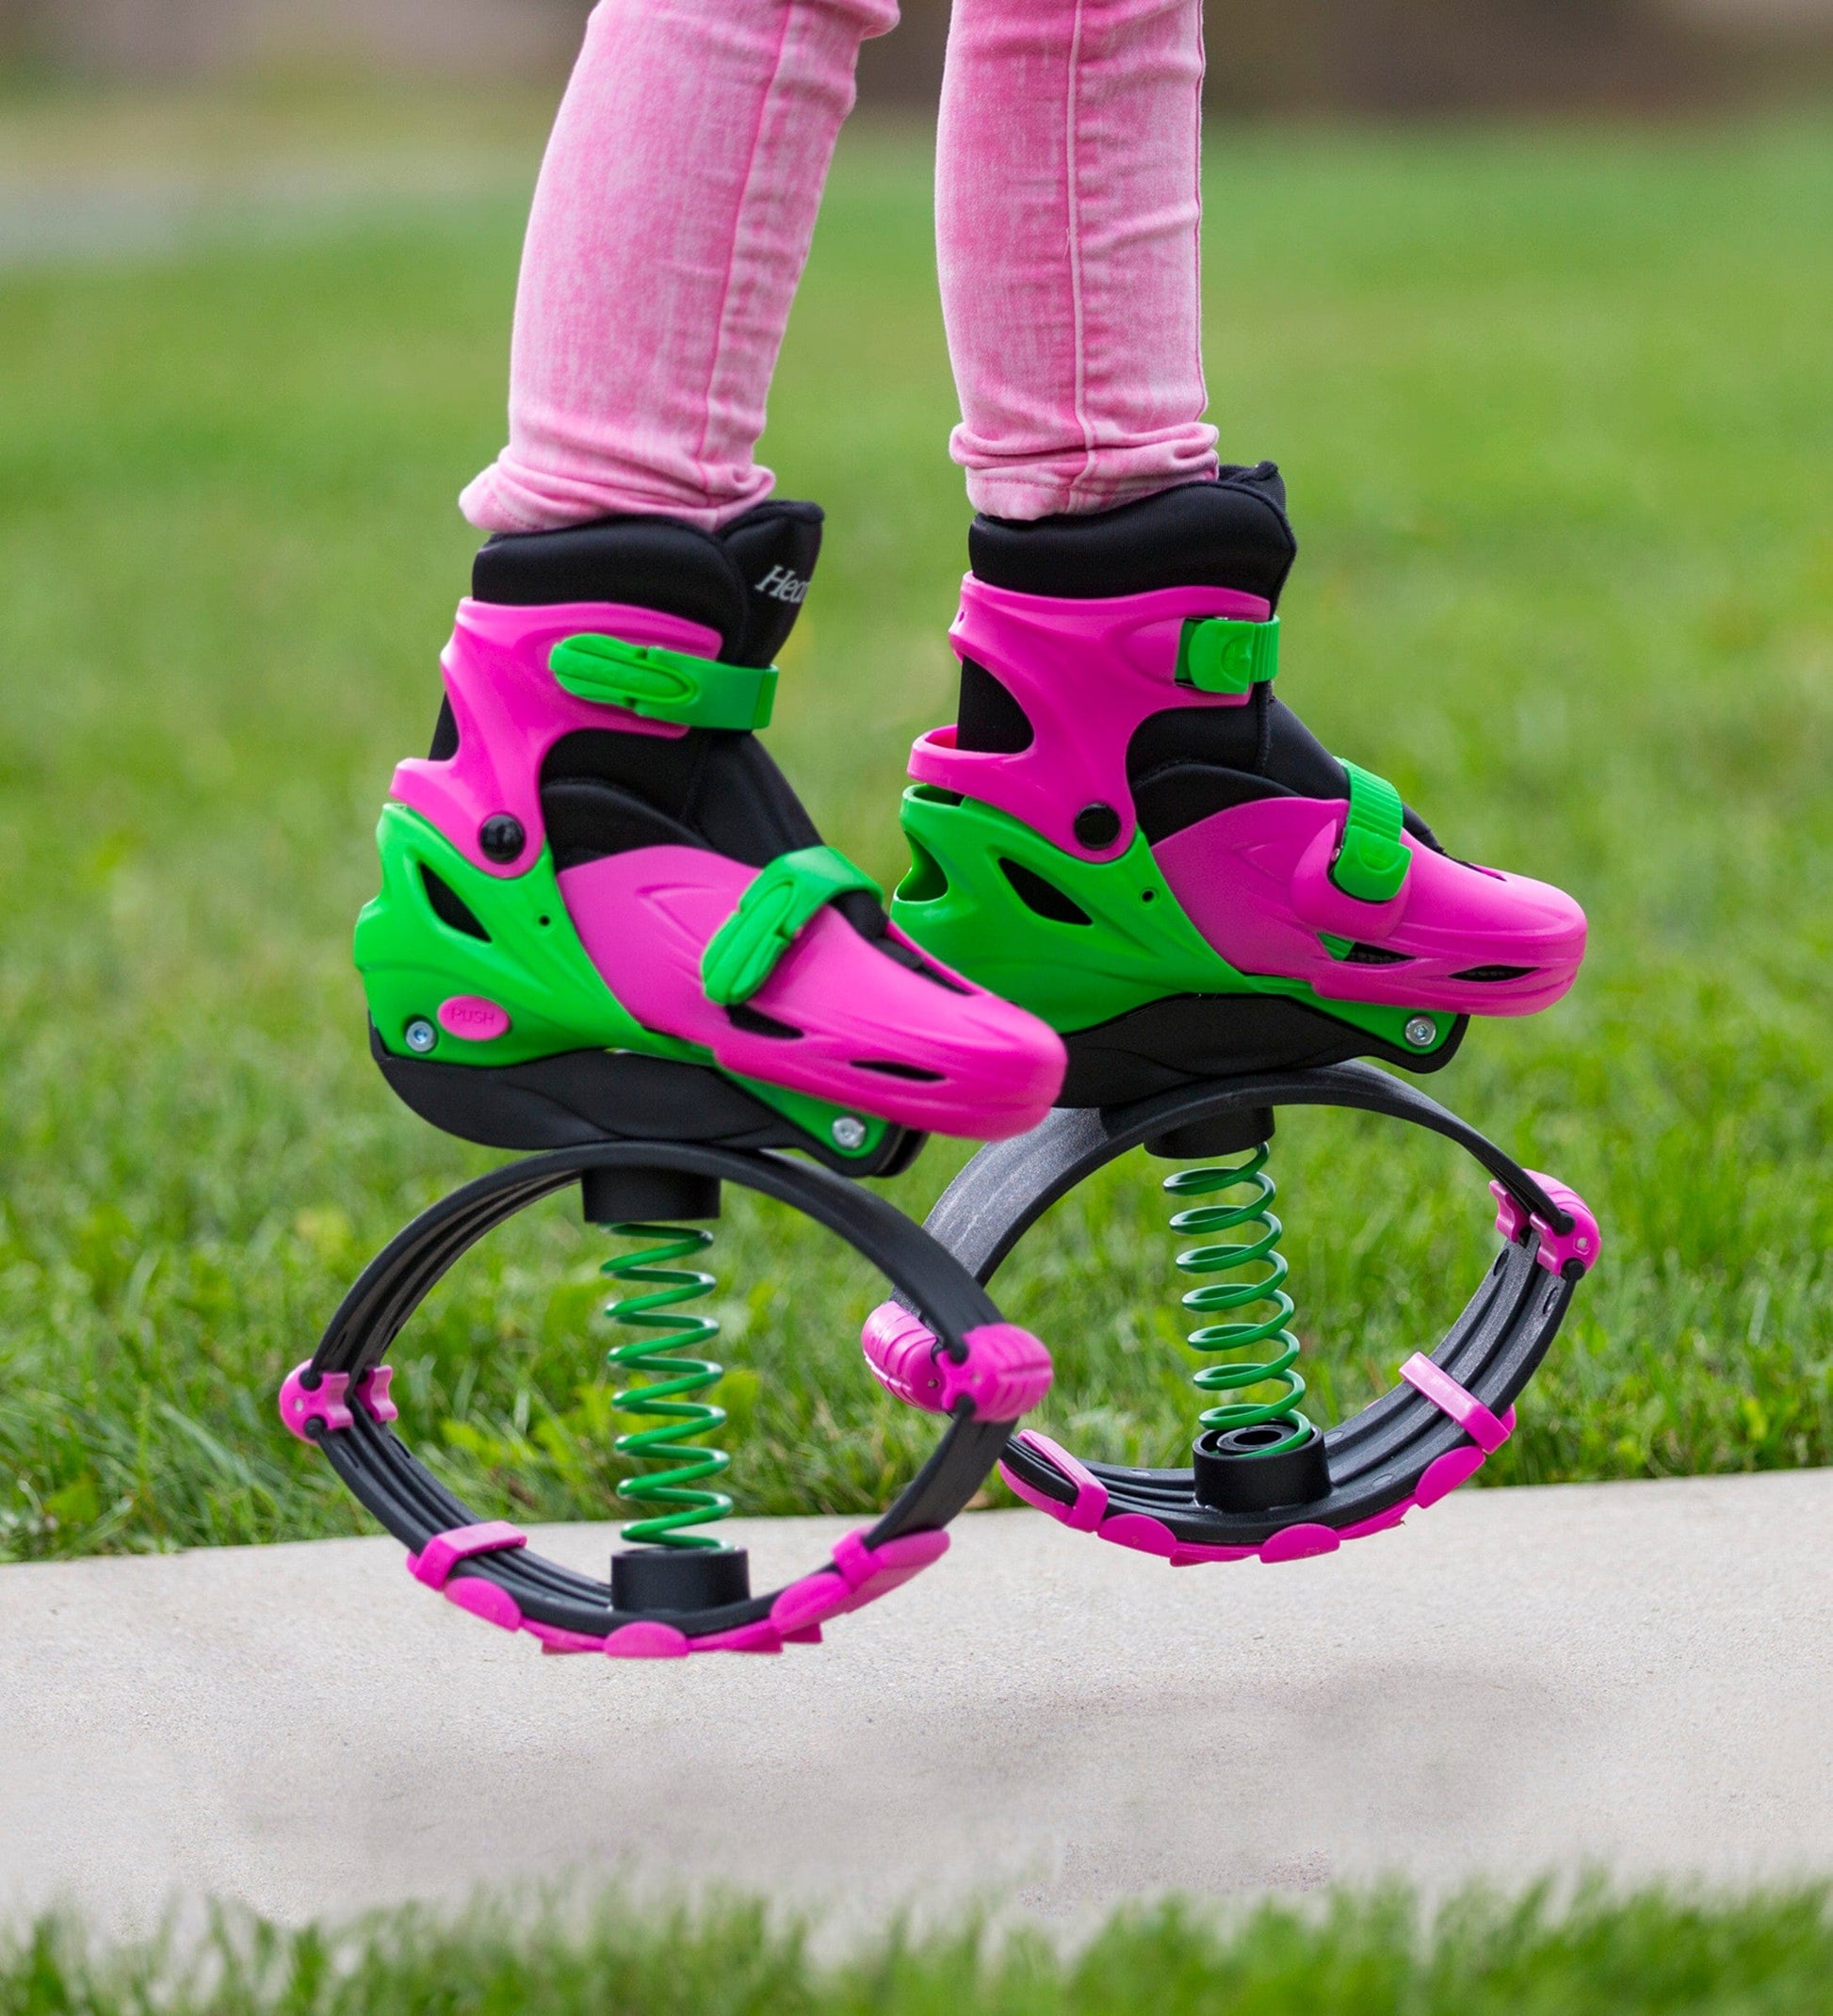 Moon Shoes- Bouncy Shoes, Mini Trampolines For your Feet, One Size, Black,  New and improved, Bounce your way to fun!